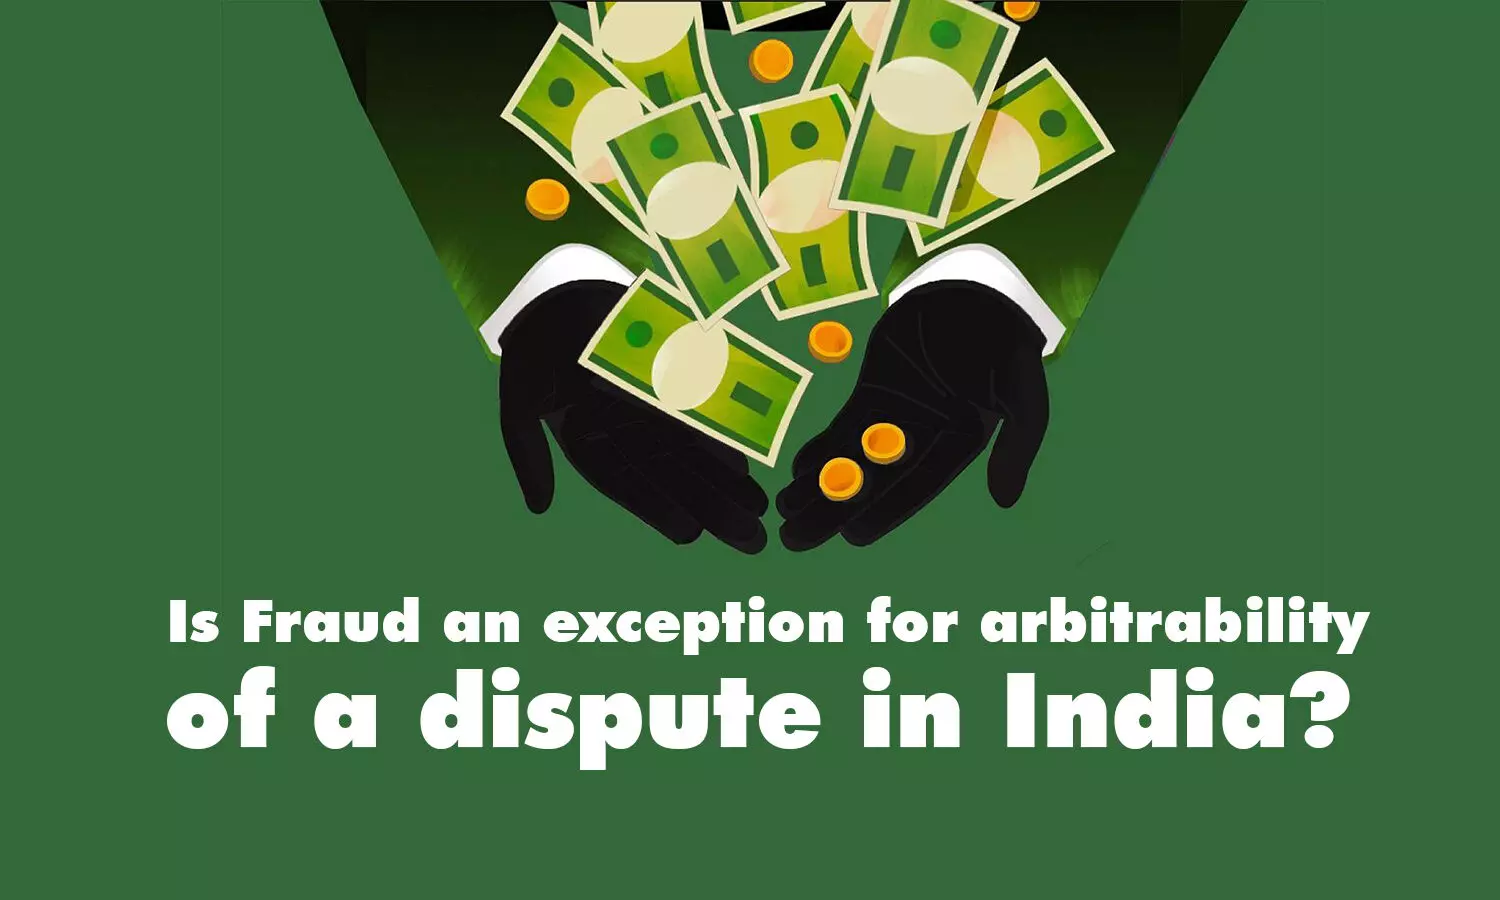 Is Fraud an exception for arbitrability of a dispute in India?